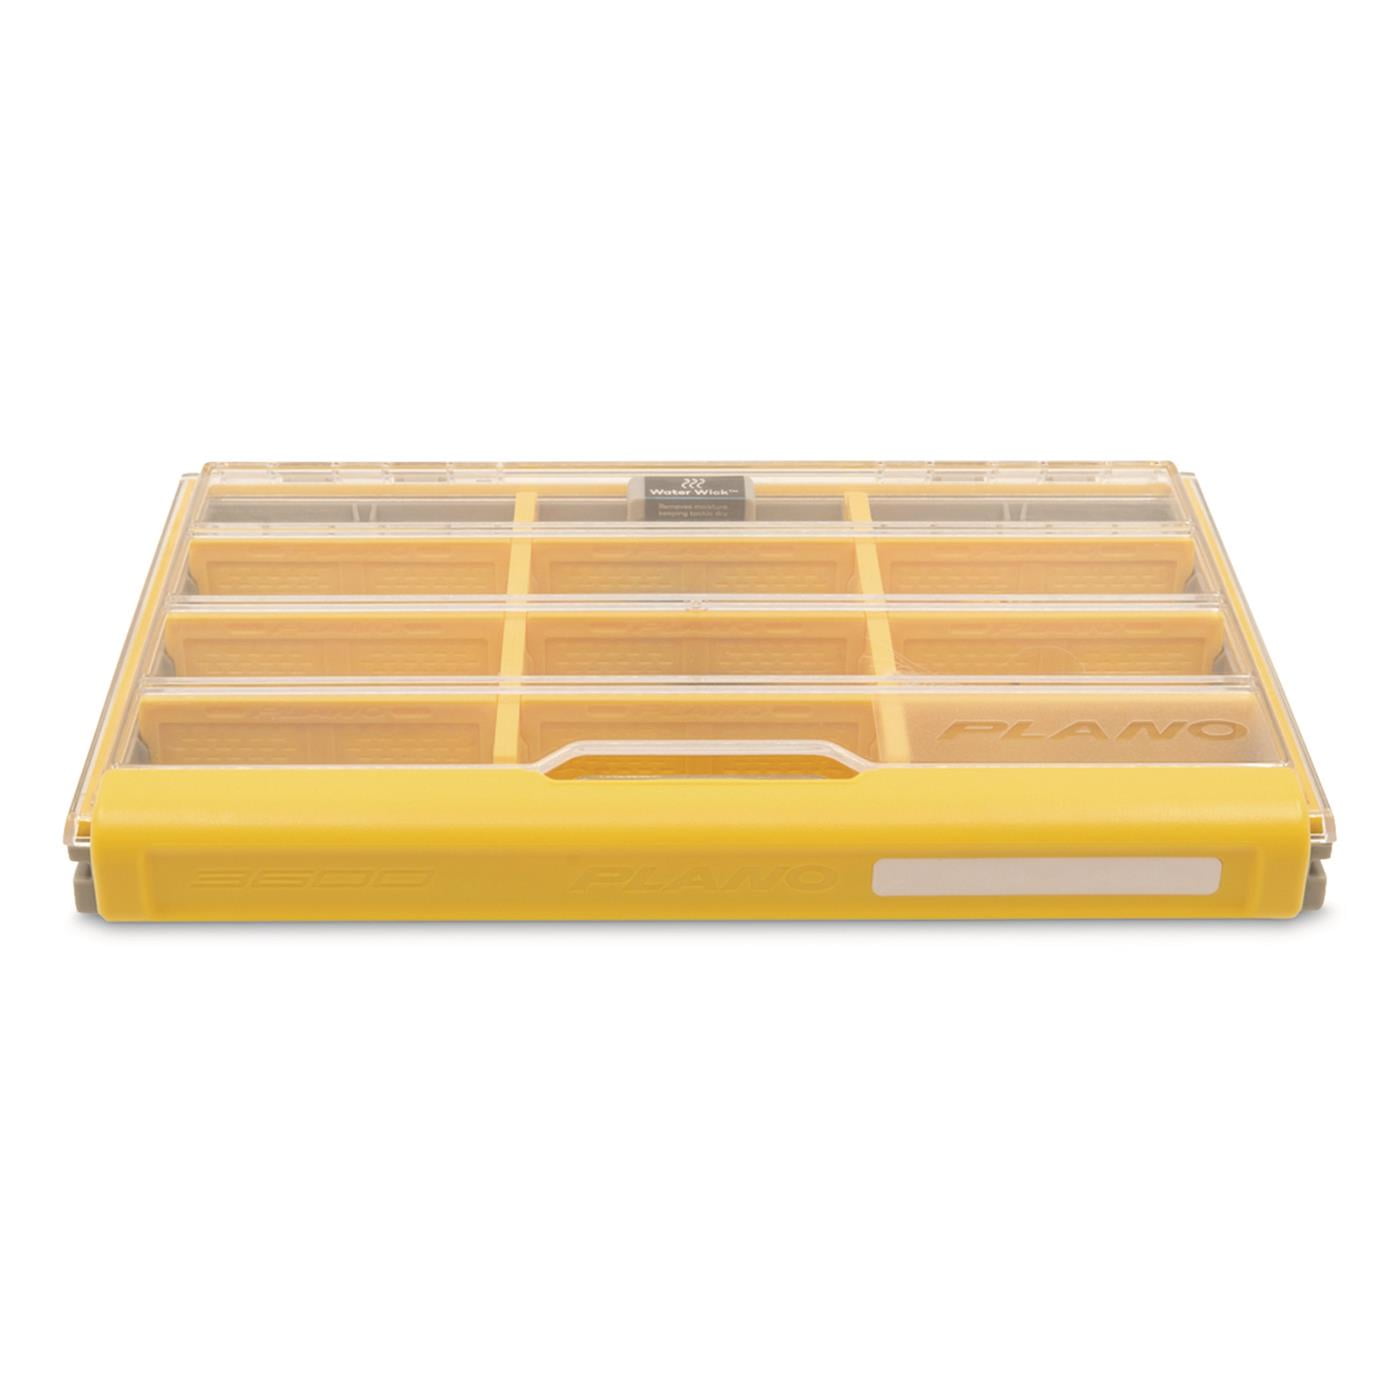 Plano Edge Flex 3600 Tackle Storage, Includes 38 Flex Dividers, Gray and  Yellow, Customizable Waterproof Tackle Box Organization, Rustrictor  Rust-Resistant Technology